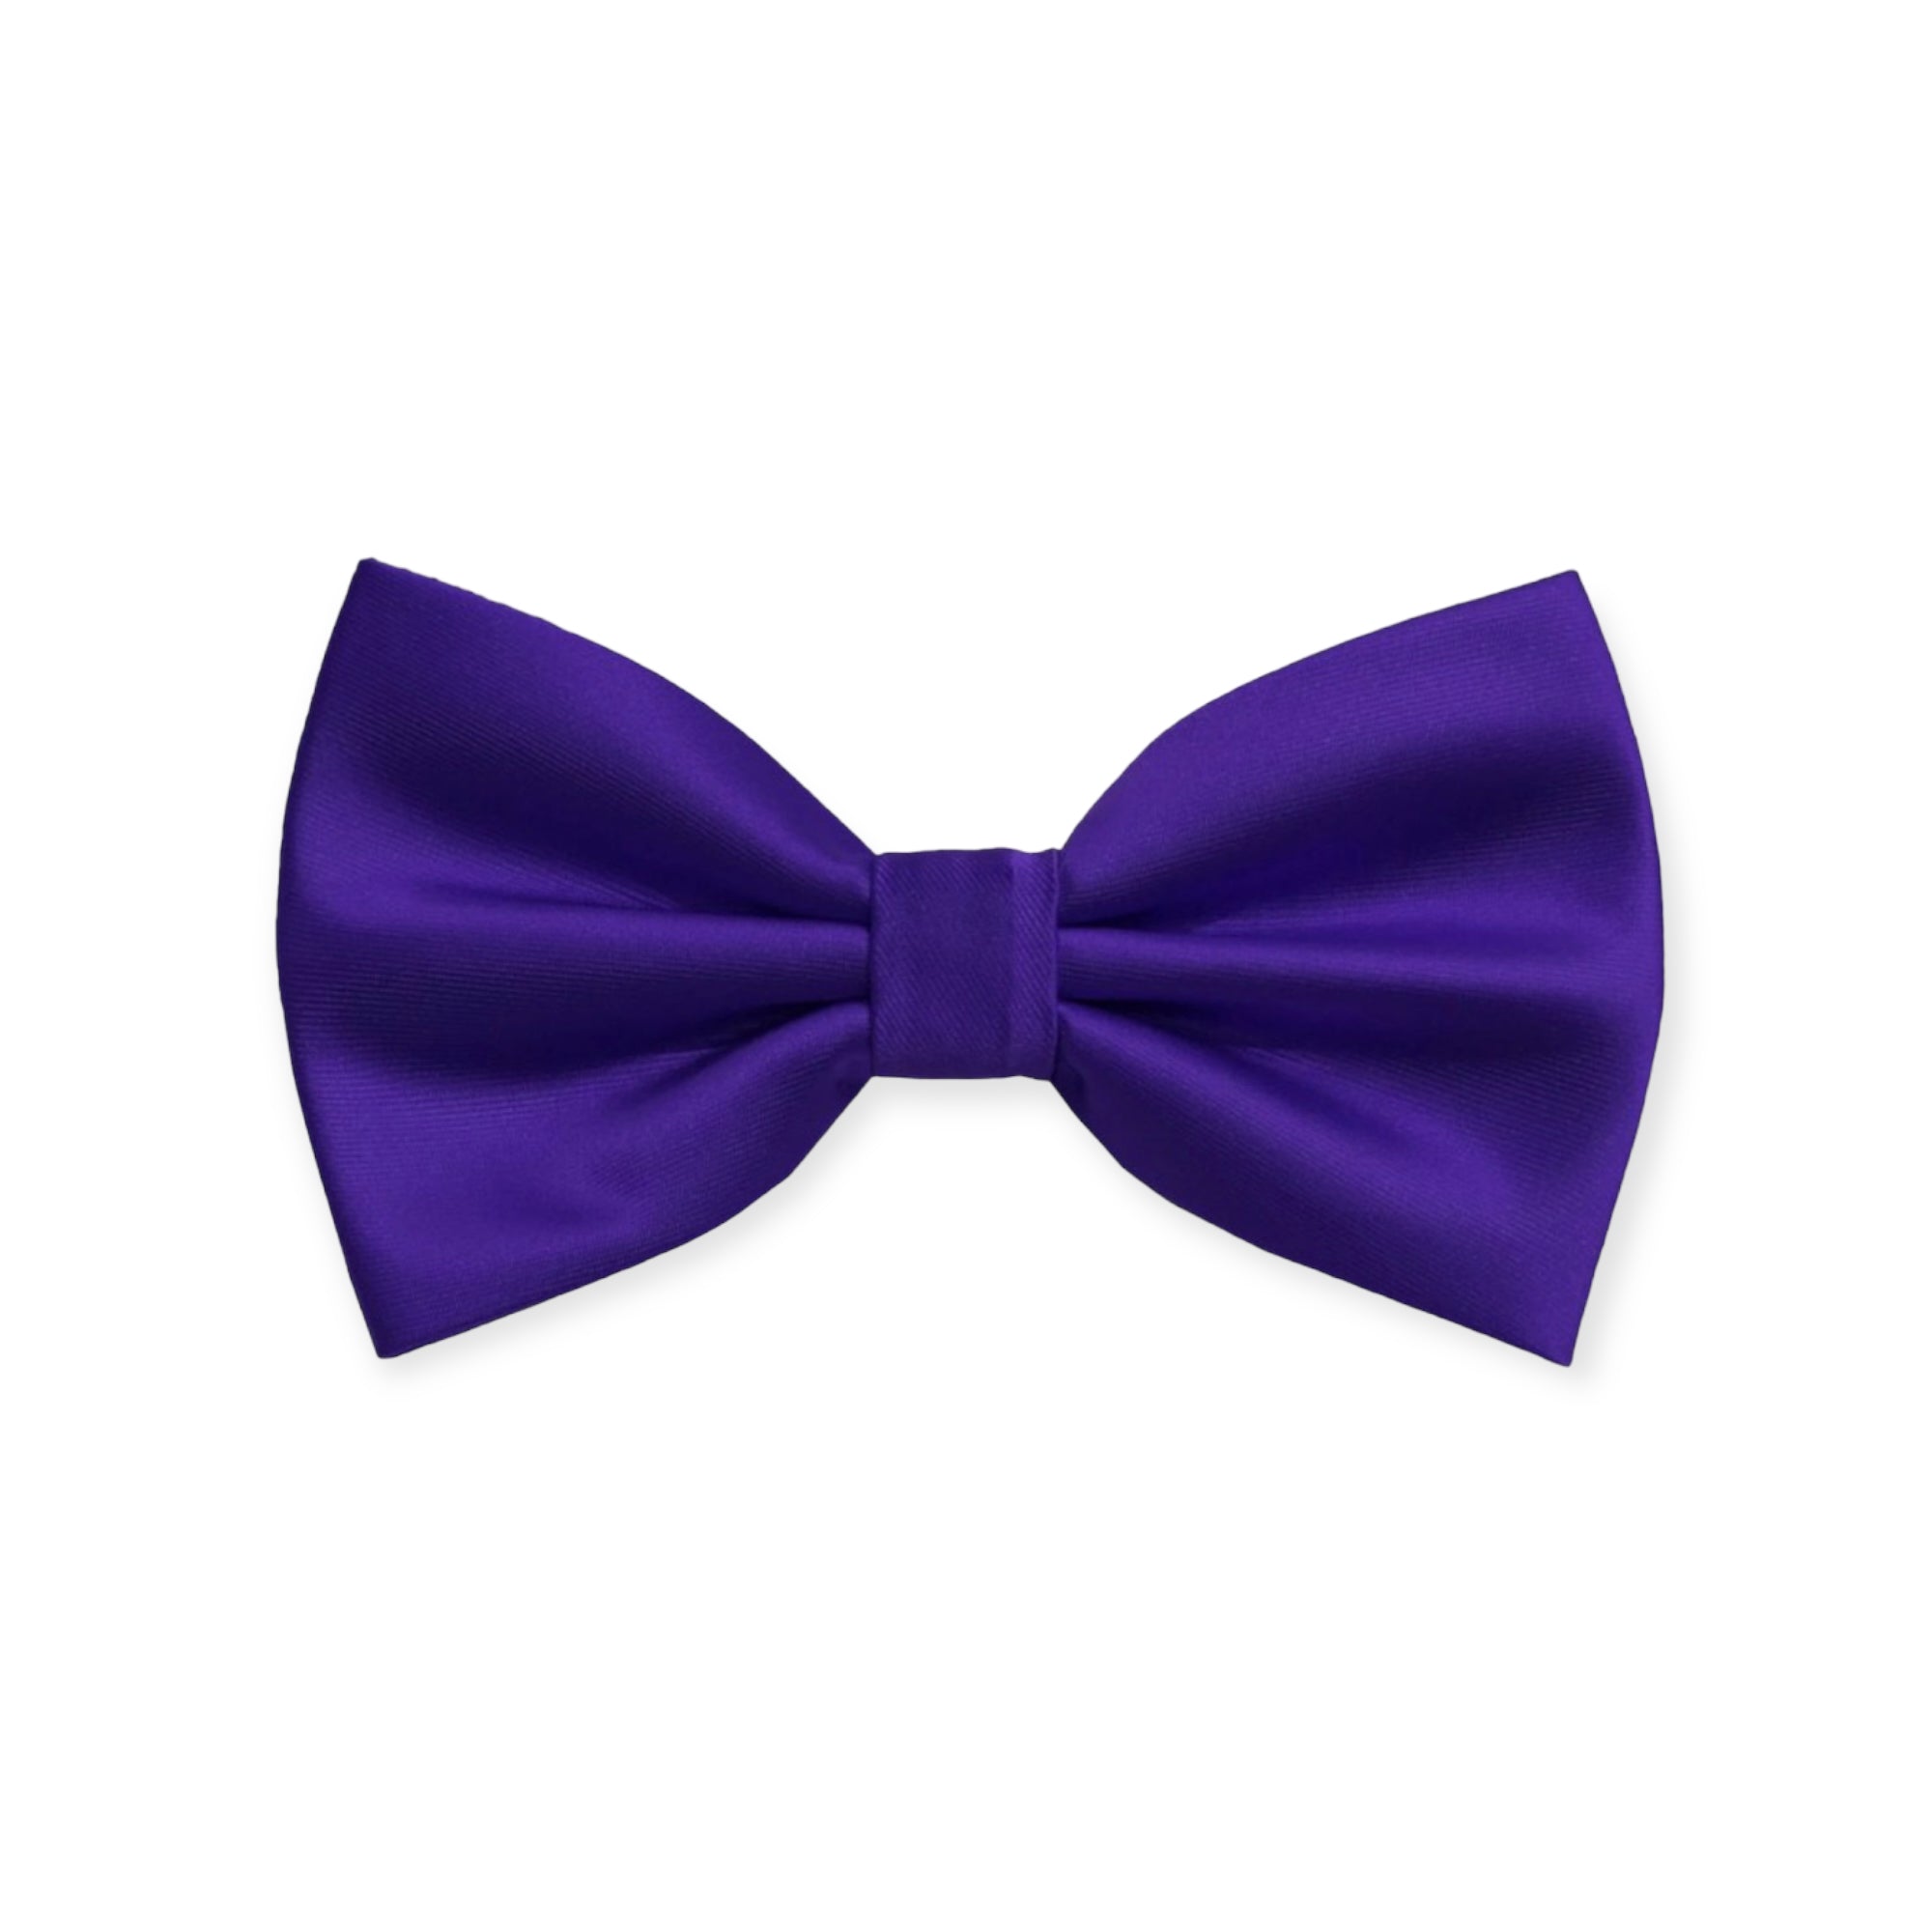 Solid Purple Bow Tie and Hanky